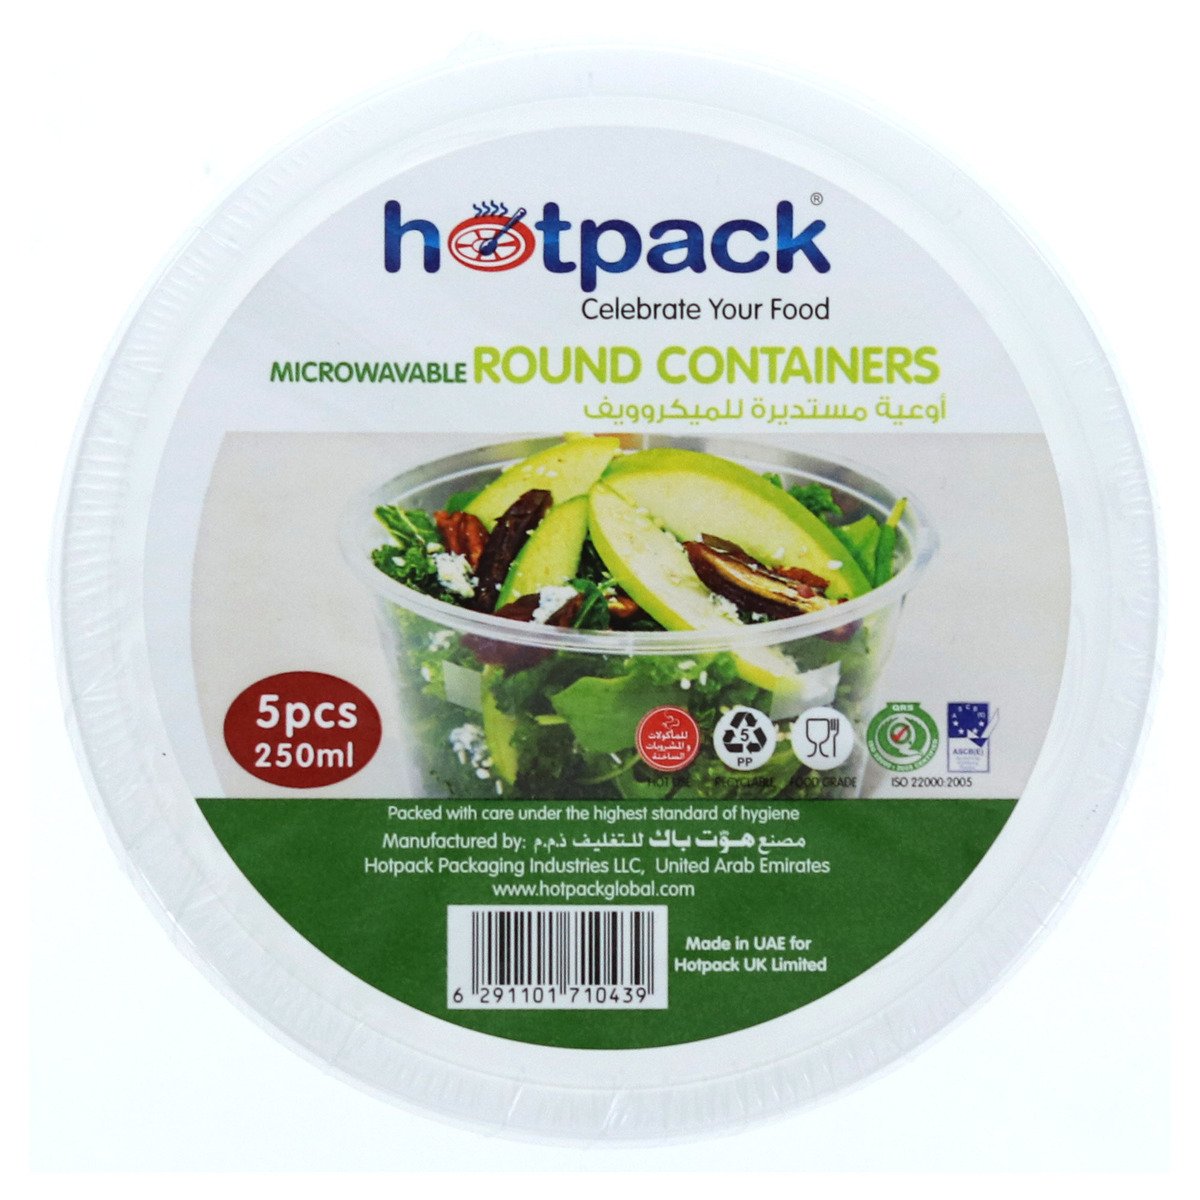 Hotpack Microwavable Round Containers 250ml 5pcs